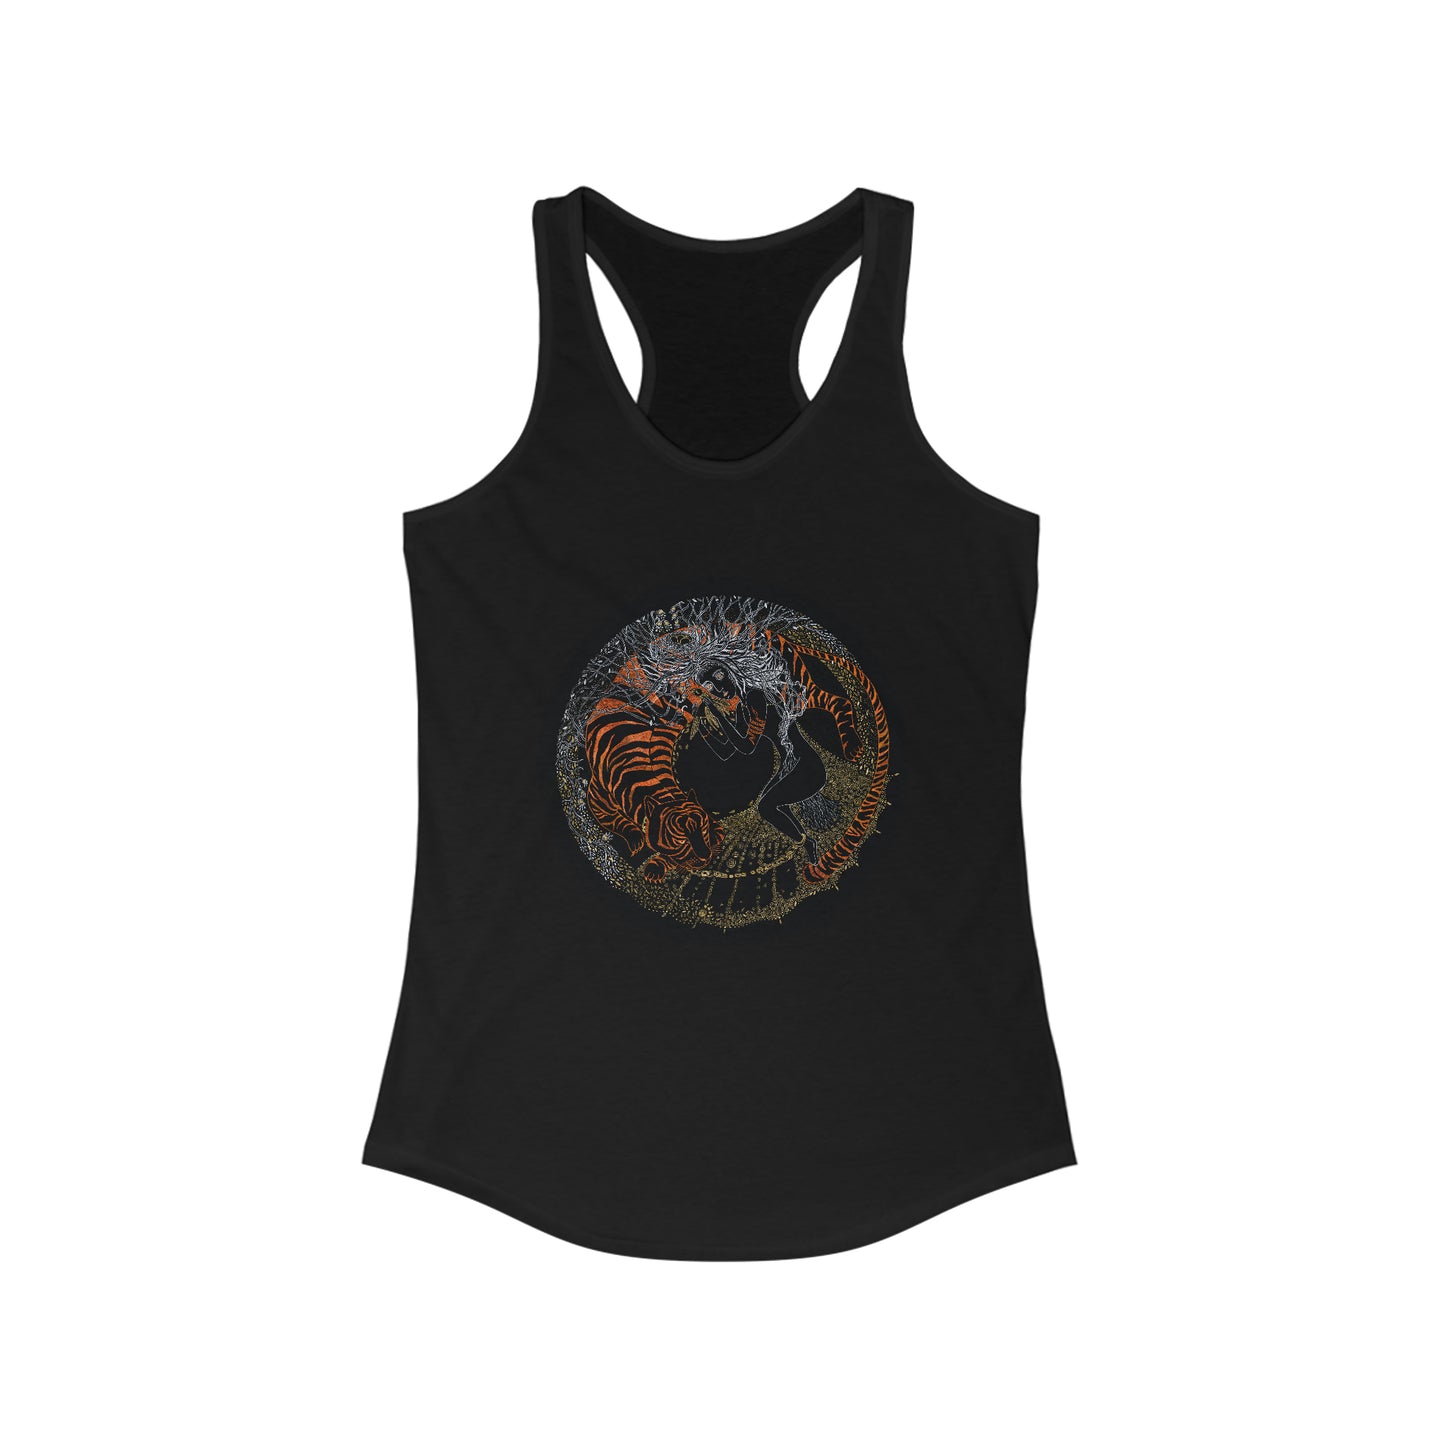 Chinese Zodiac Sign Tank Top (Tiger)